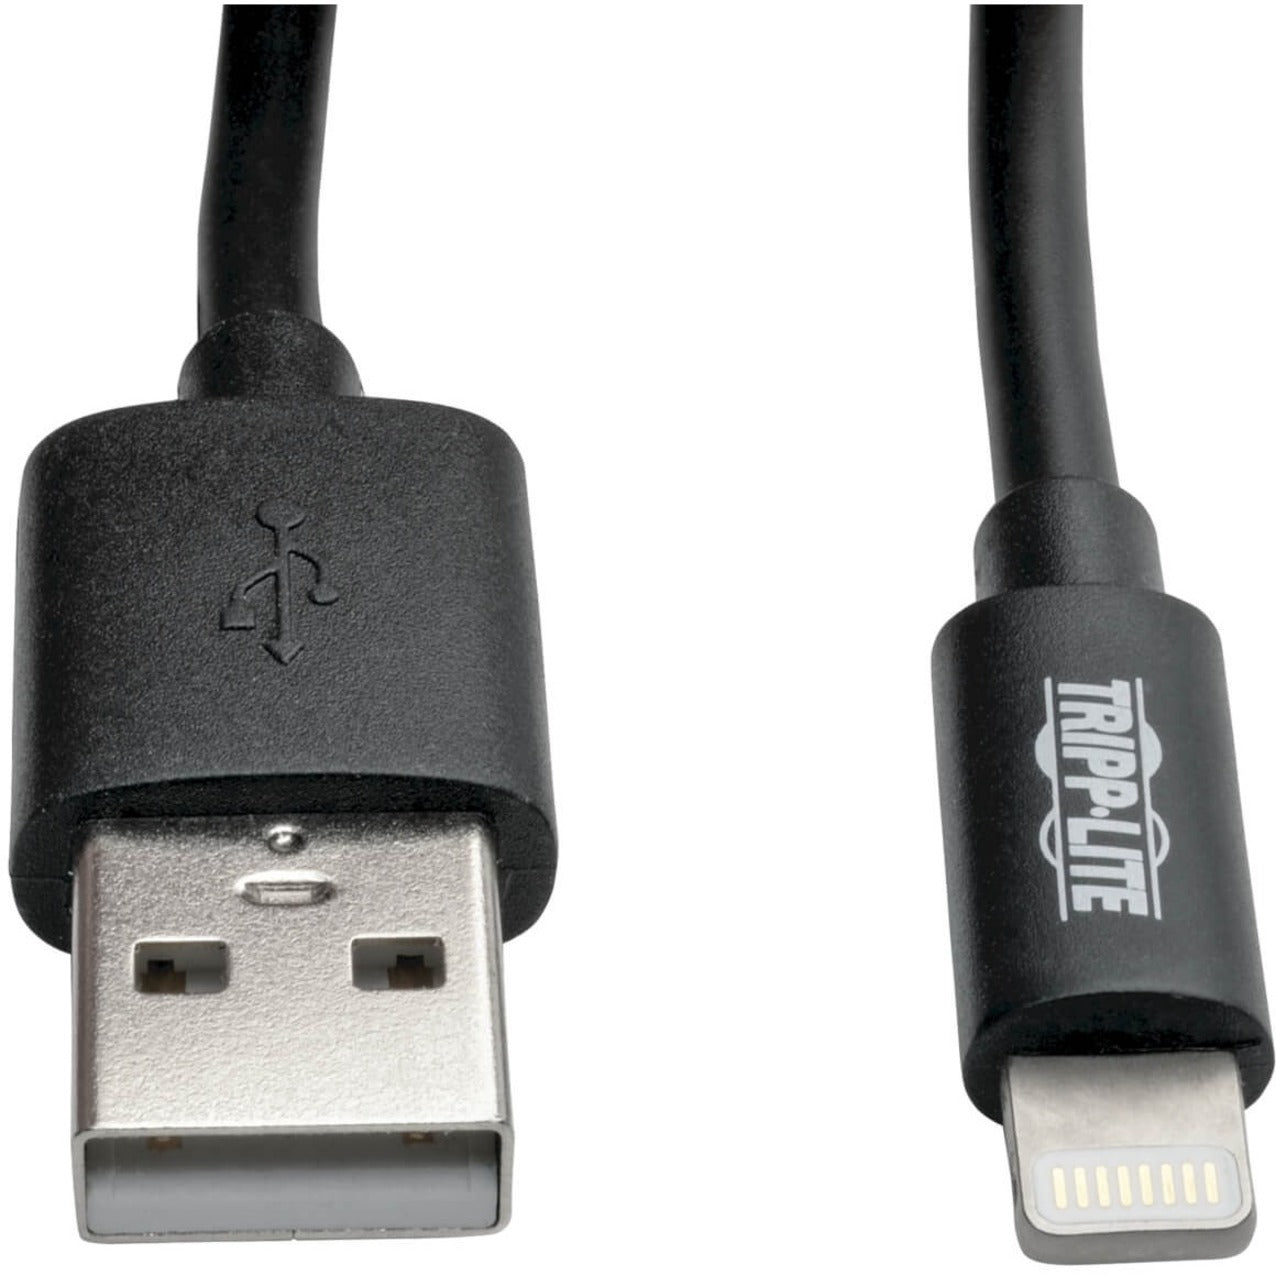 Tripp Lite M100-004COIL-BK USB Sync/Charge Coiled Cable with Lightning Connector, Black, 4 ft.